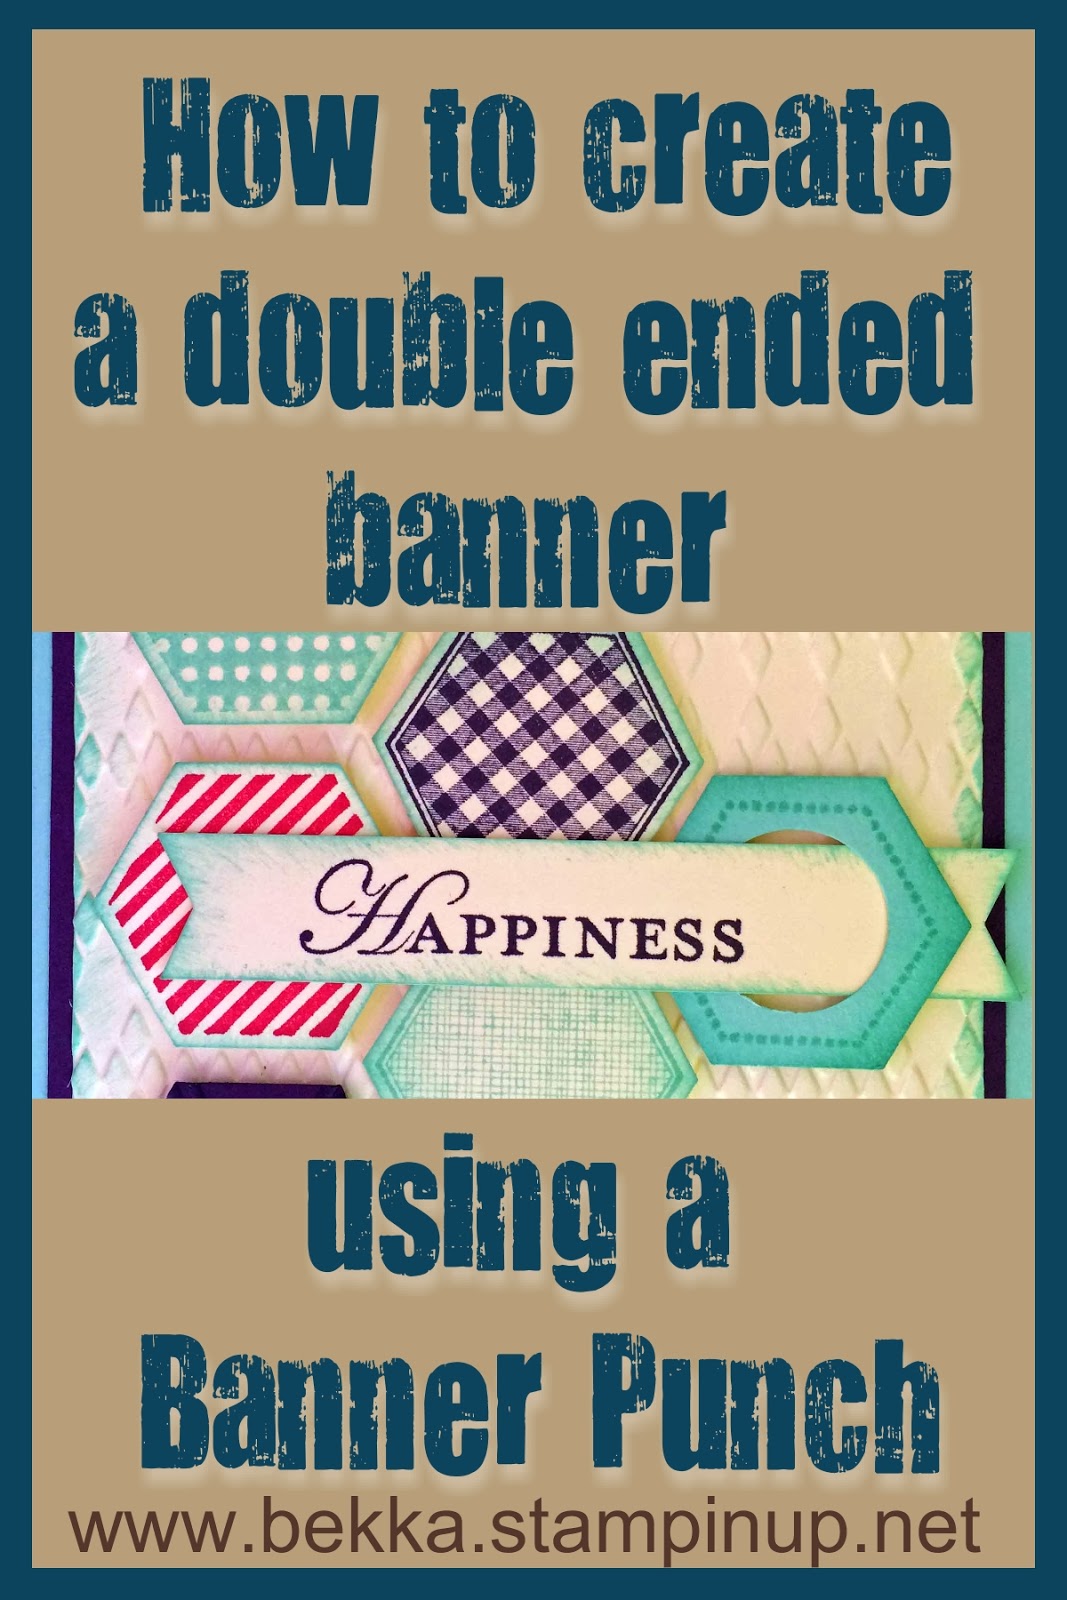 How to make a Double Ended Banner using the Banner Punch from Stampin' Up! - photo tutorial here